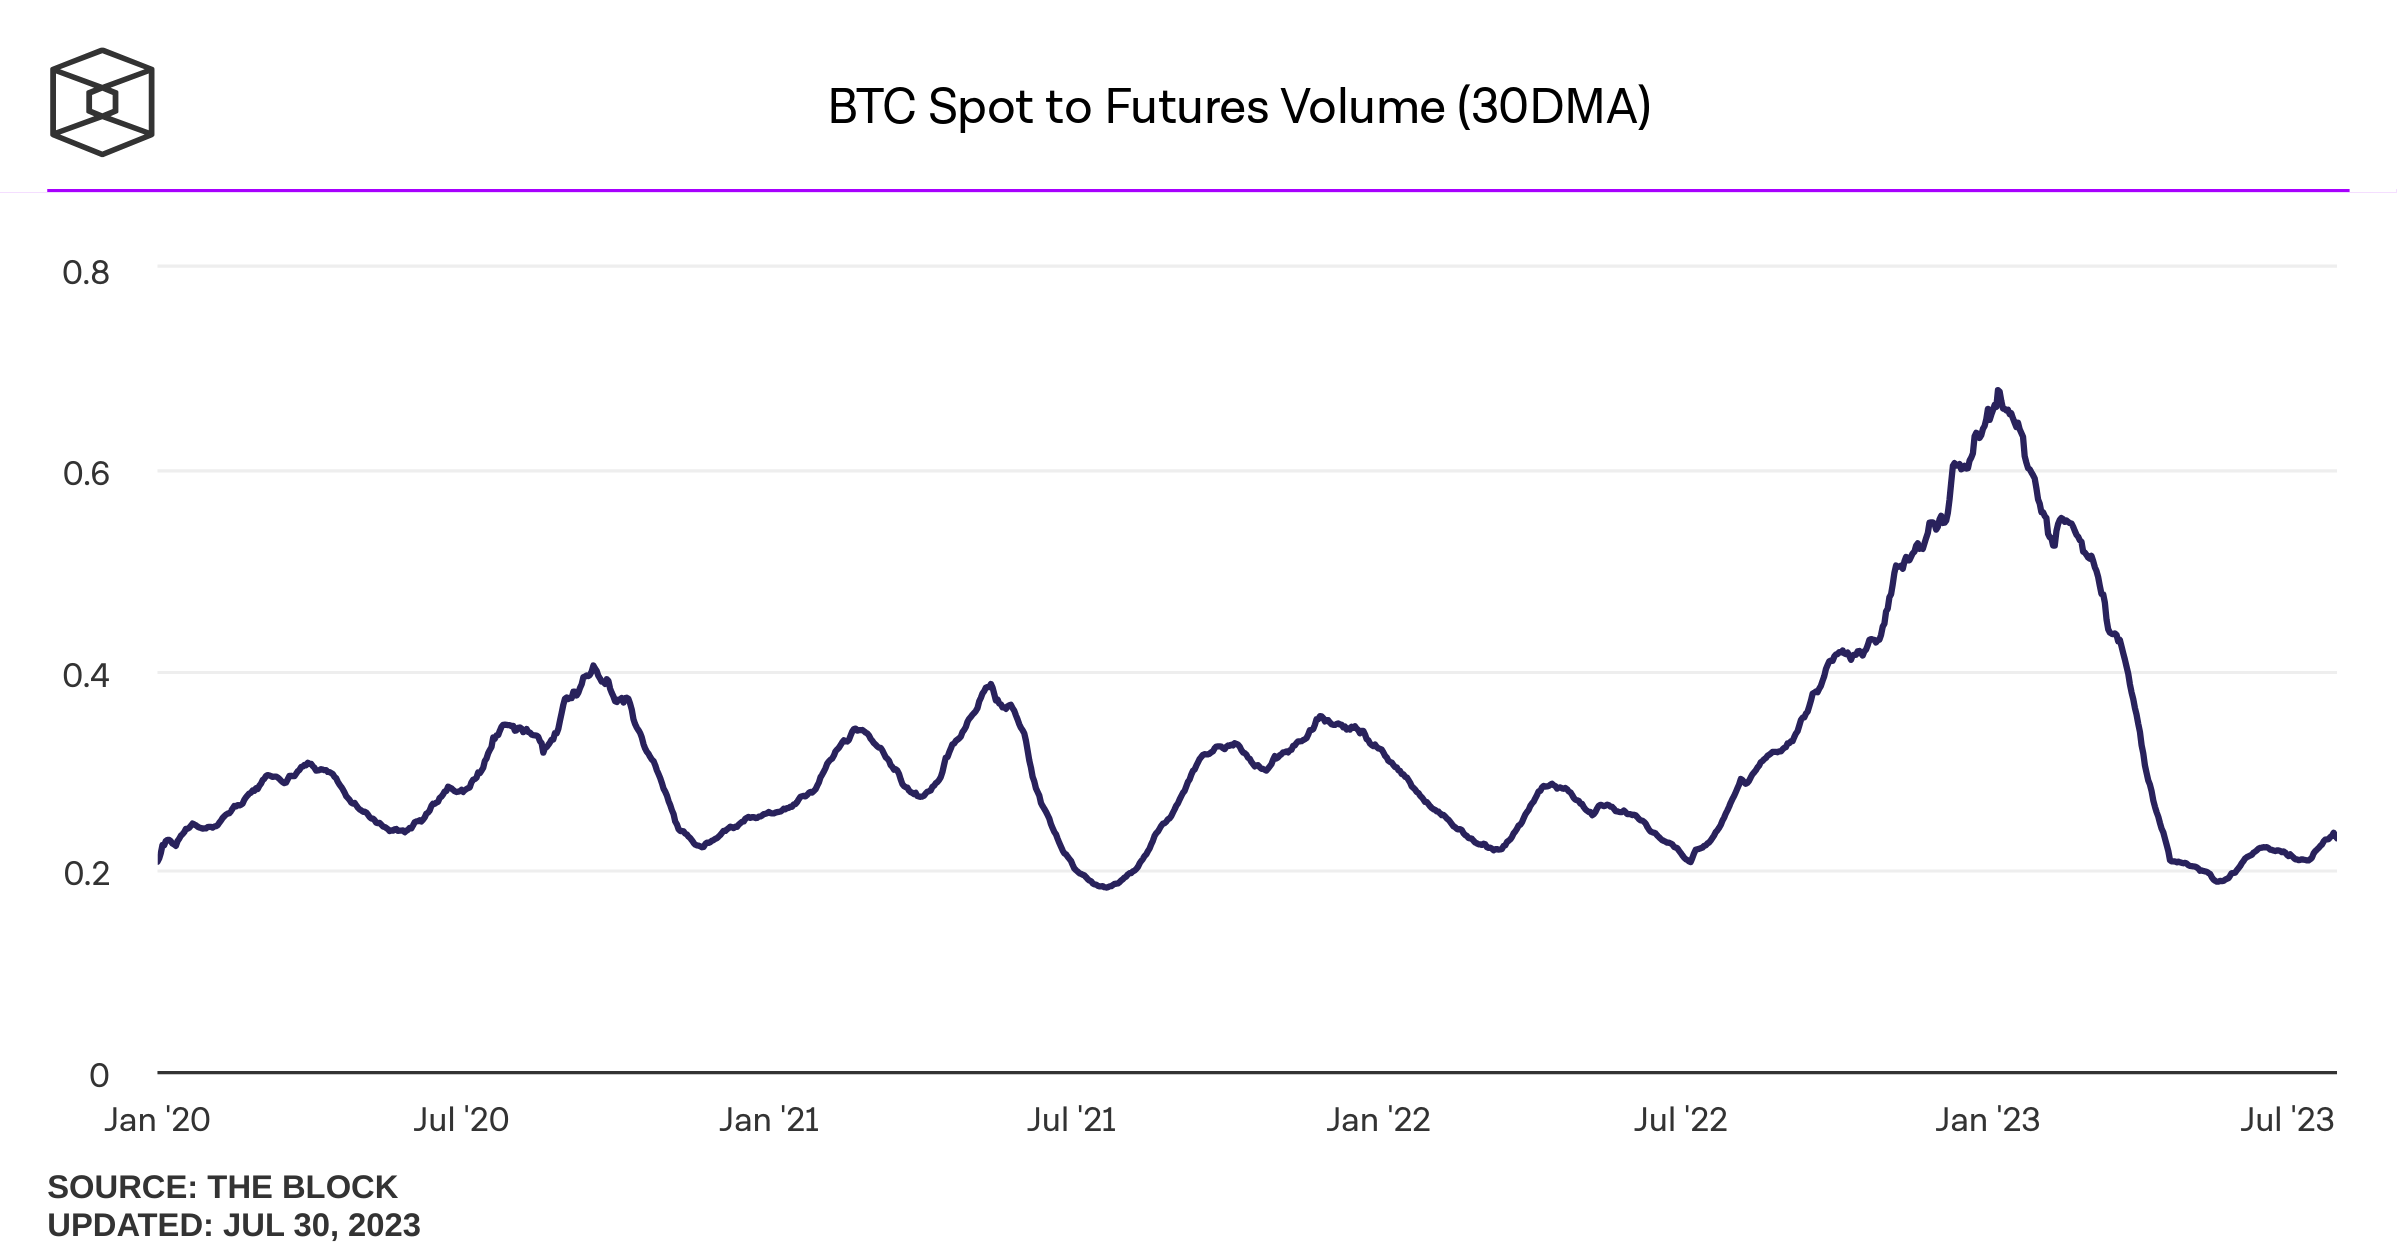 Bitcoin volume falls to 3-year low as summer activity sags 1691057253895 6d89a4df 92bc 4fbf 9599 17428125d51c